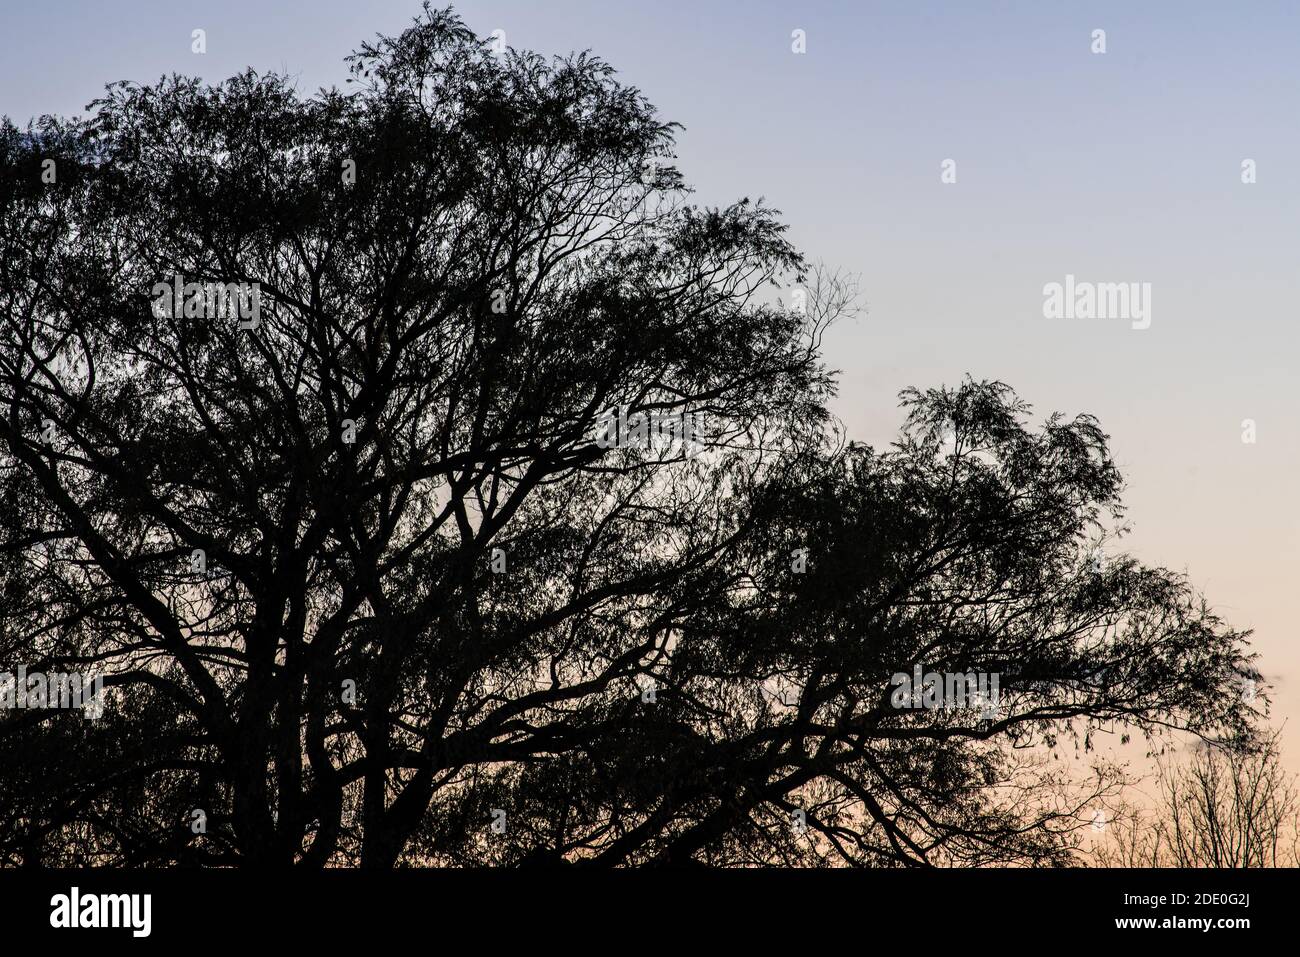 Black Willow silhouette on a fall evening Stock Photo